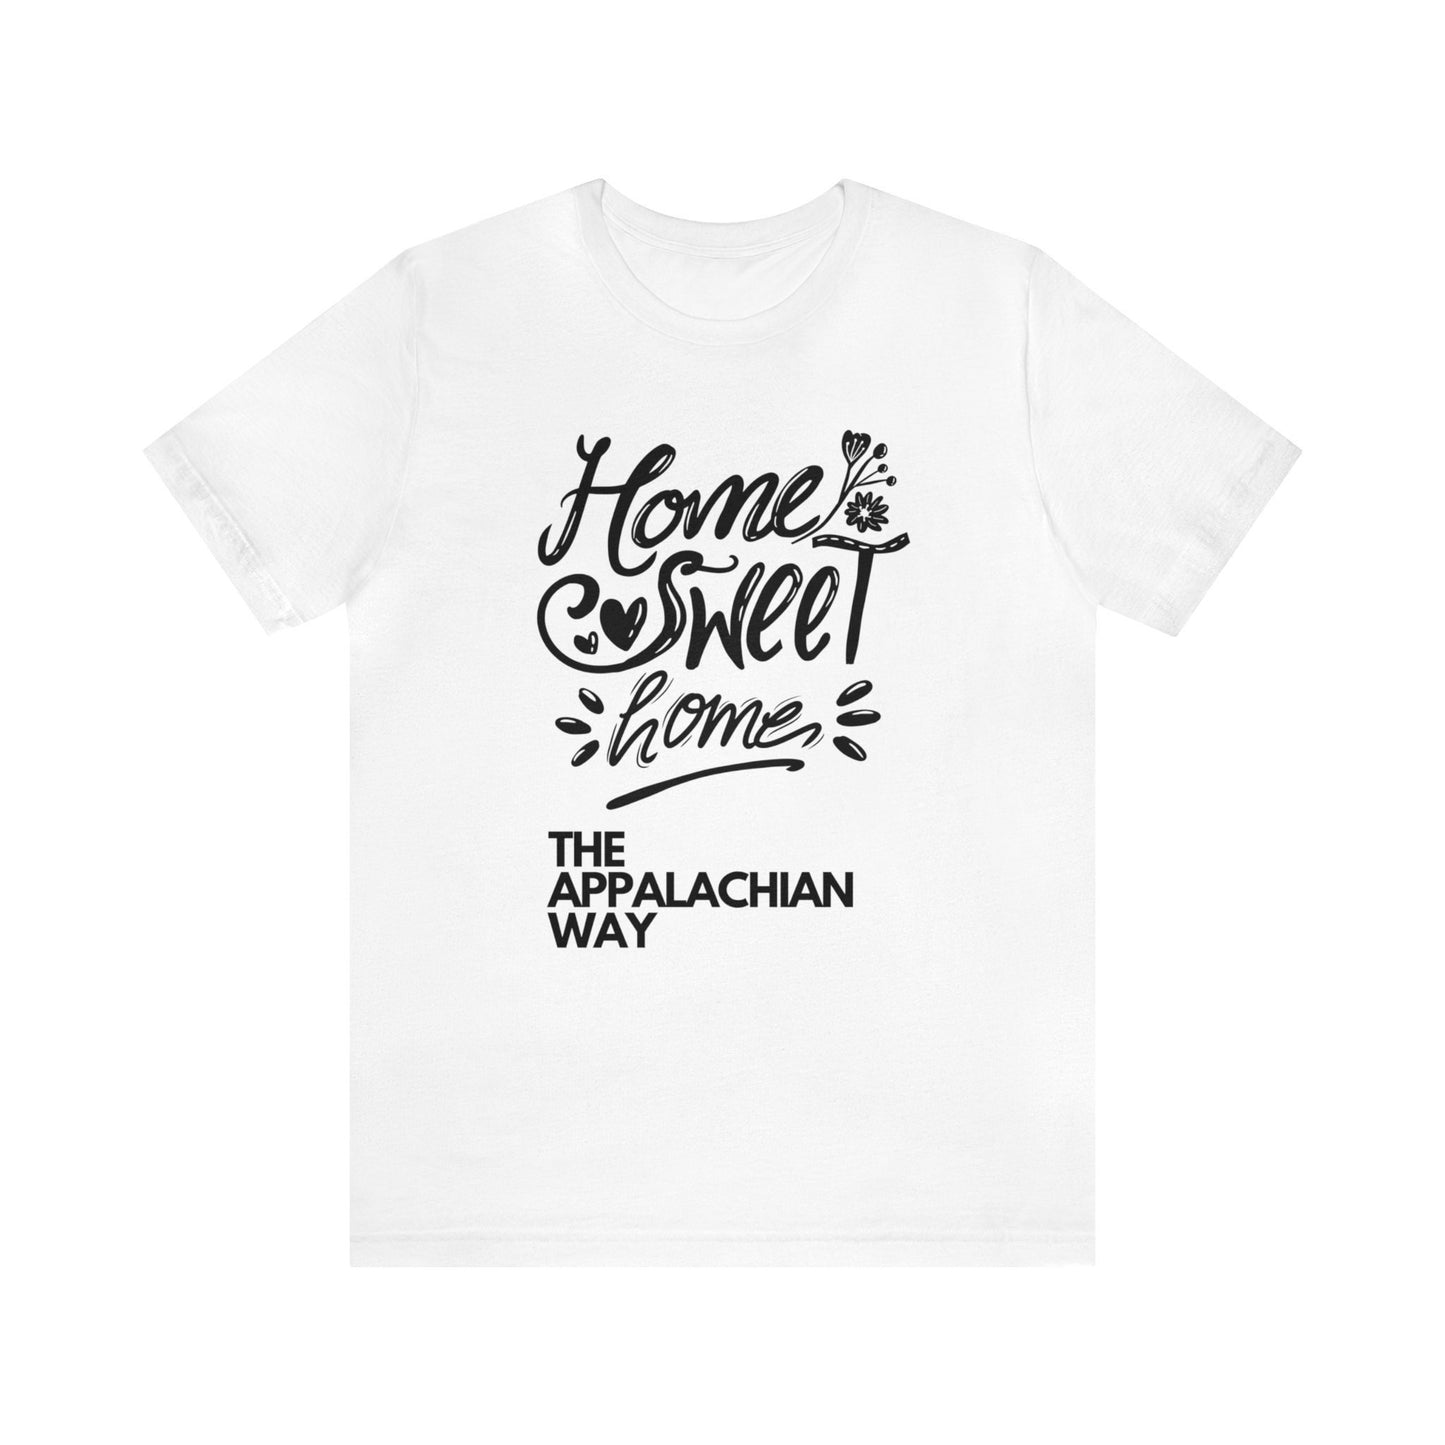 Home Sweet Home The Appalachian Way T-shirt | Love Your Home Tee, Inspirational Shirt, Country shirt, Ladies Fashion, gifts for her